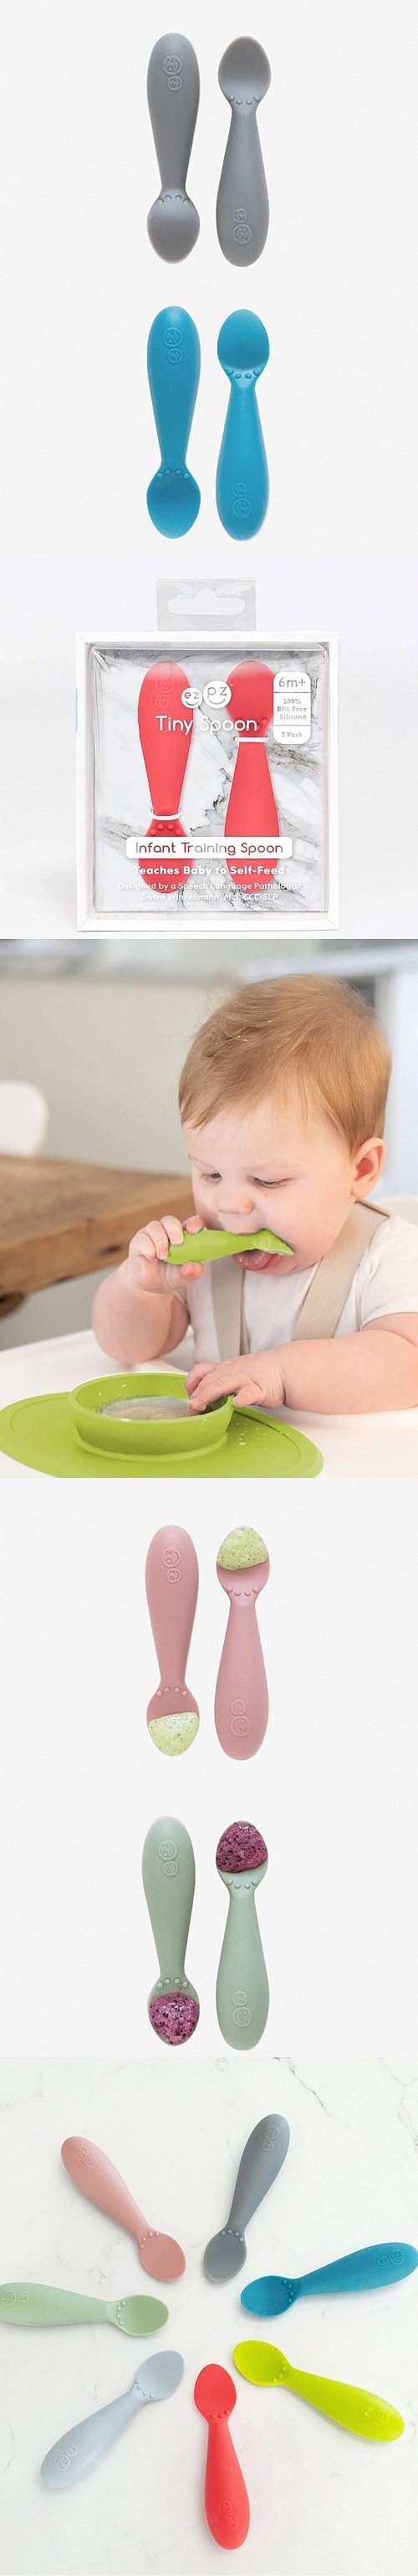 BabyCity - Tiny Spoon Twin-Pack Soft silicone protects baby's developing  teeth and makes gumming + self-feeding safe